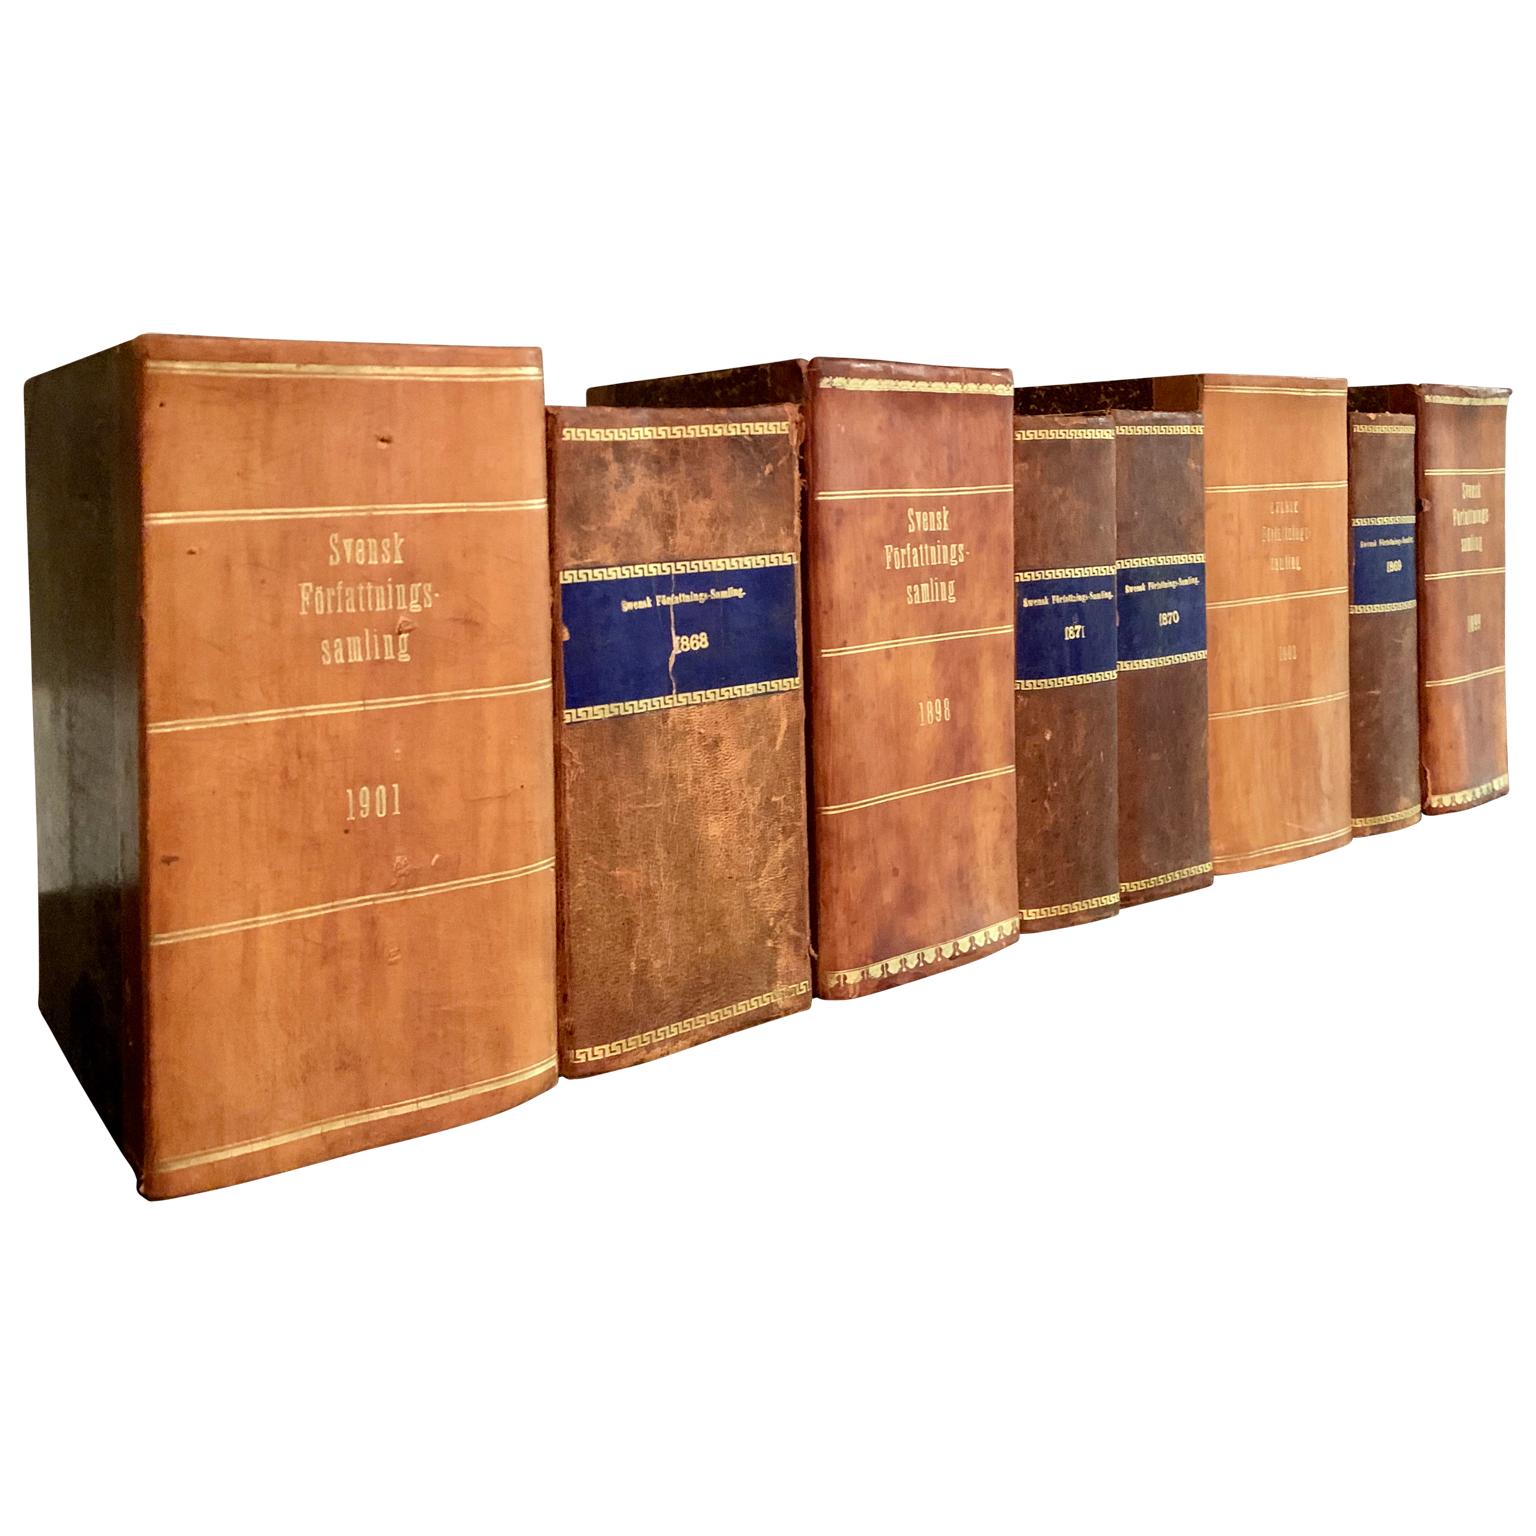 A collection of 8 Swedish decorative antique leather bound library books.

This lot of unusually large antique books from Sweden are wrapped in beautiful vintage leather-bound covers, comprised of a selection of warm tones and gold leaf print